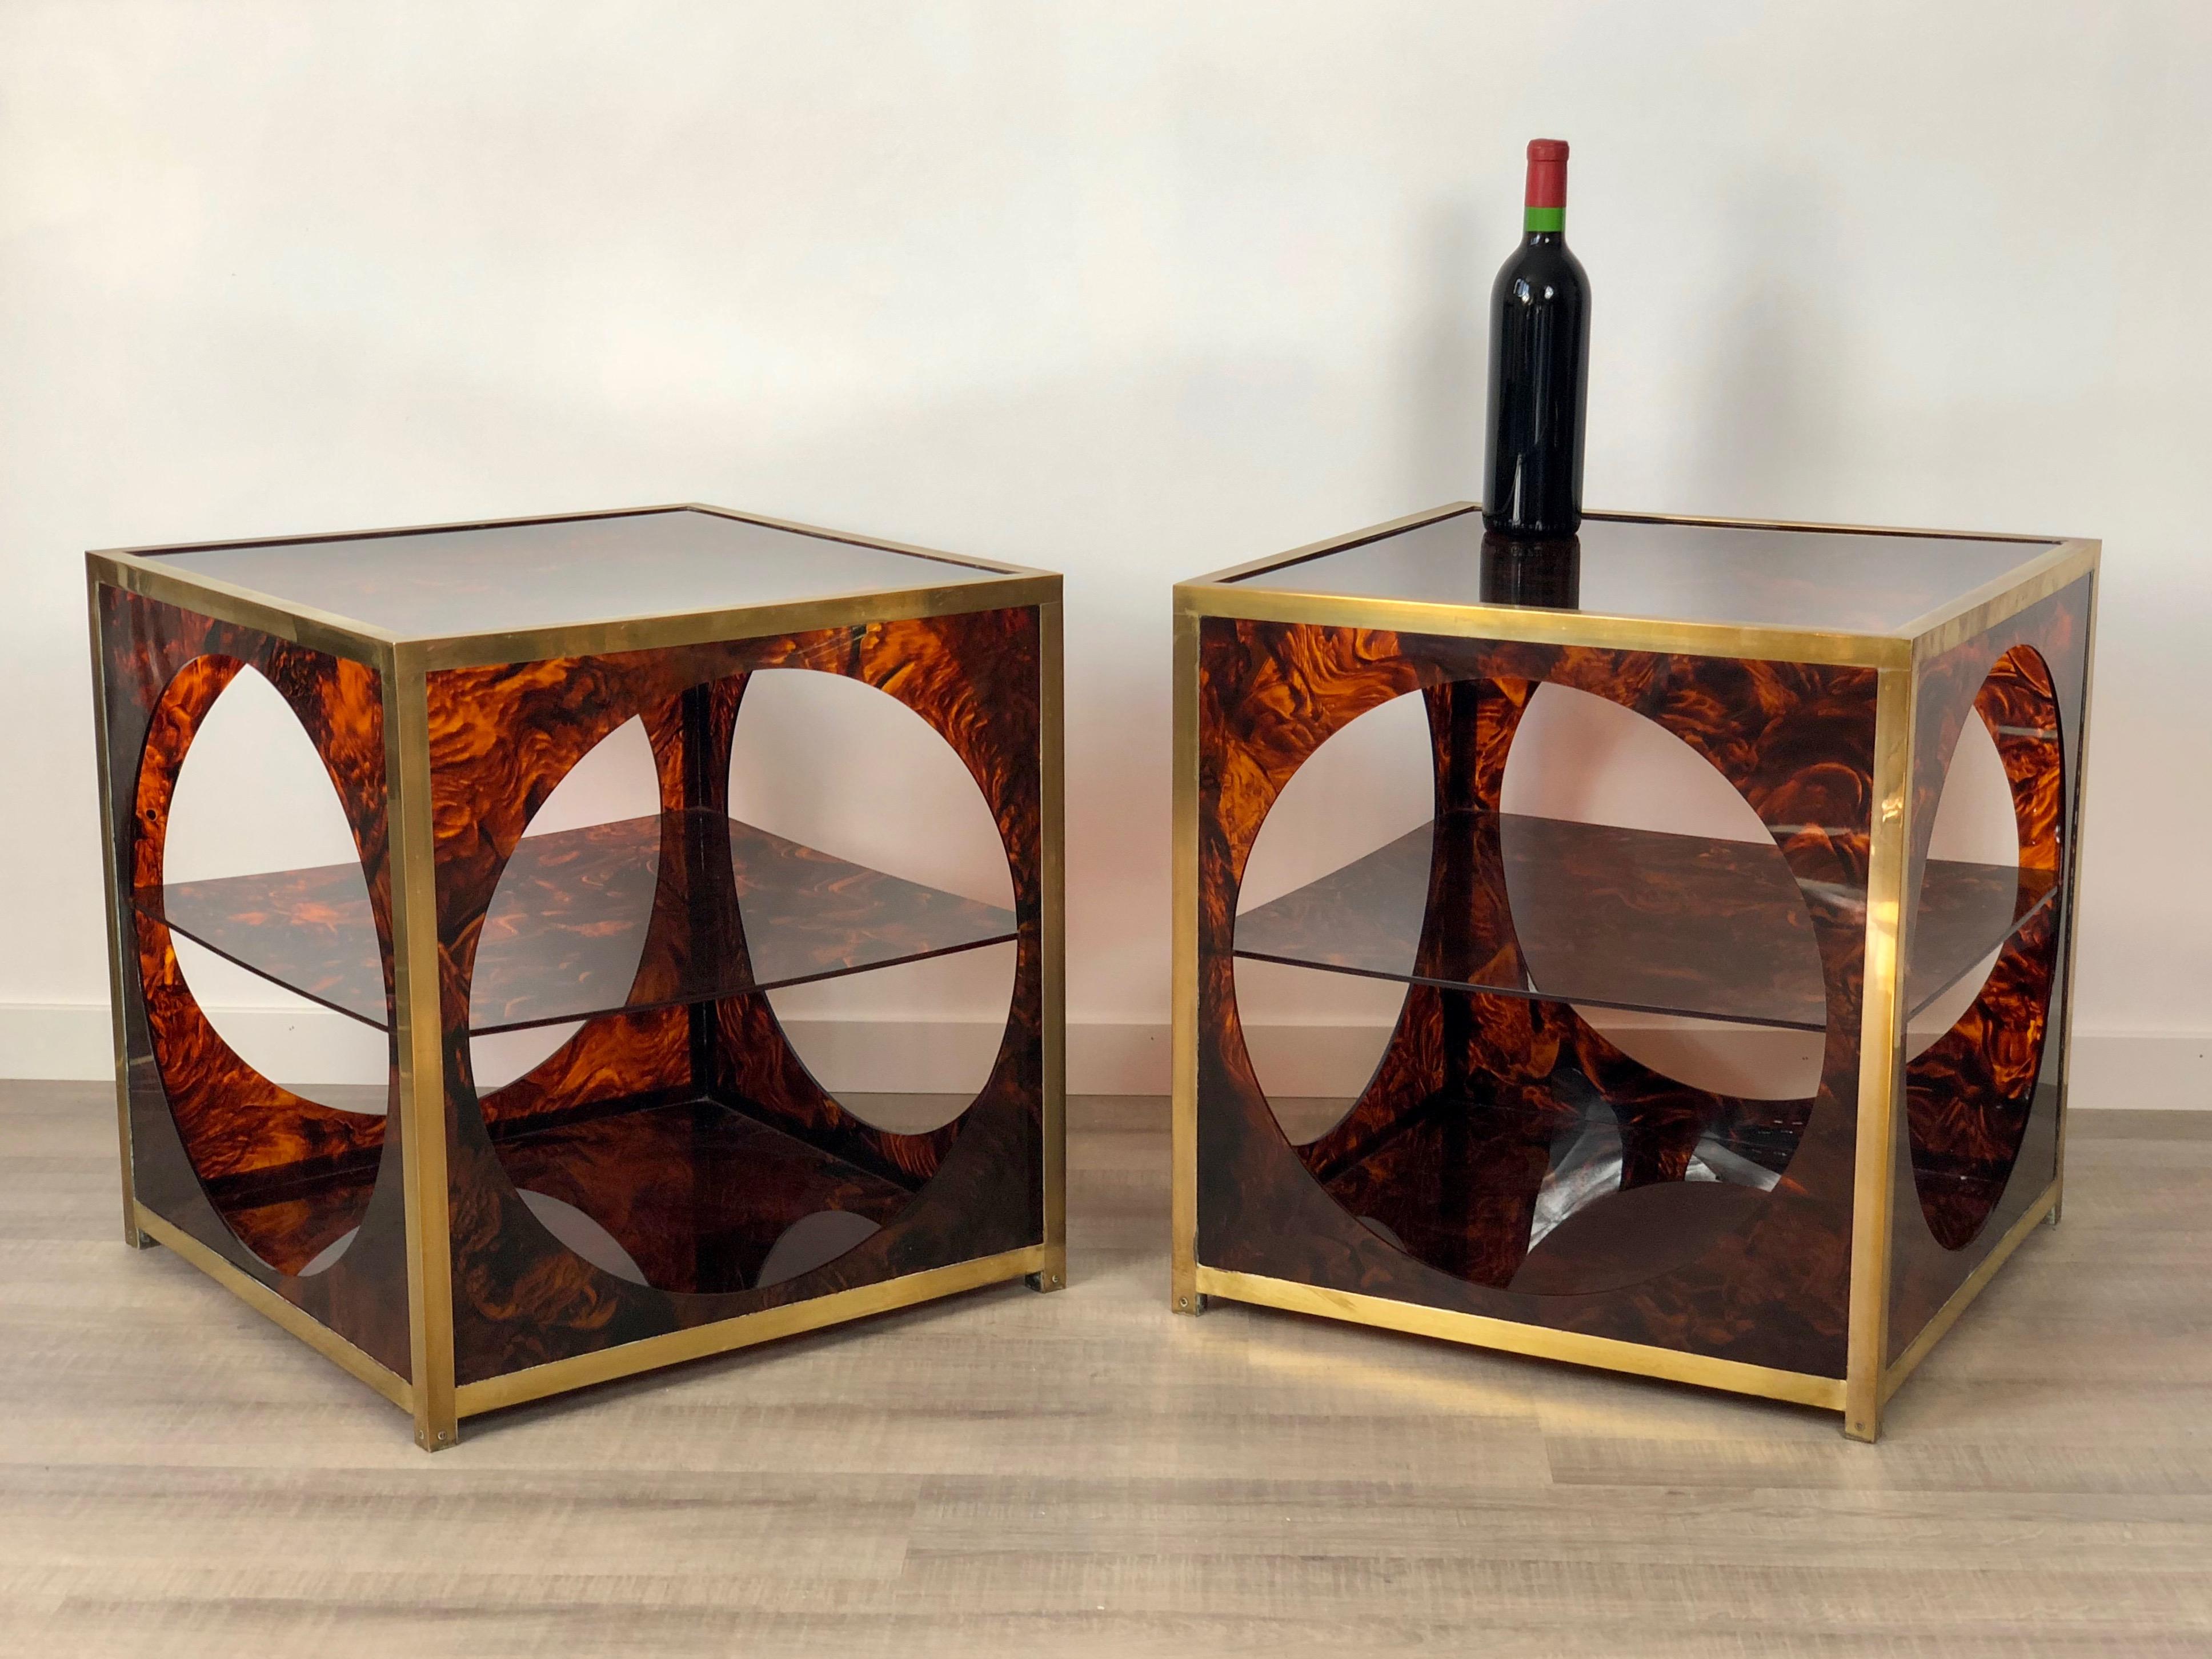 Pair of elegant side/coffee tables in faux tortoiseshell lucite and brass details. They feature an unique geometrical design that remembers 1970s' Christian Dior style: an open cube with circular windows inside which a Lucite shelf is